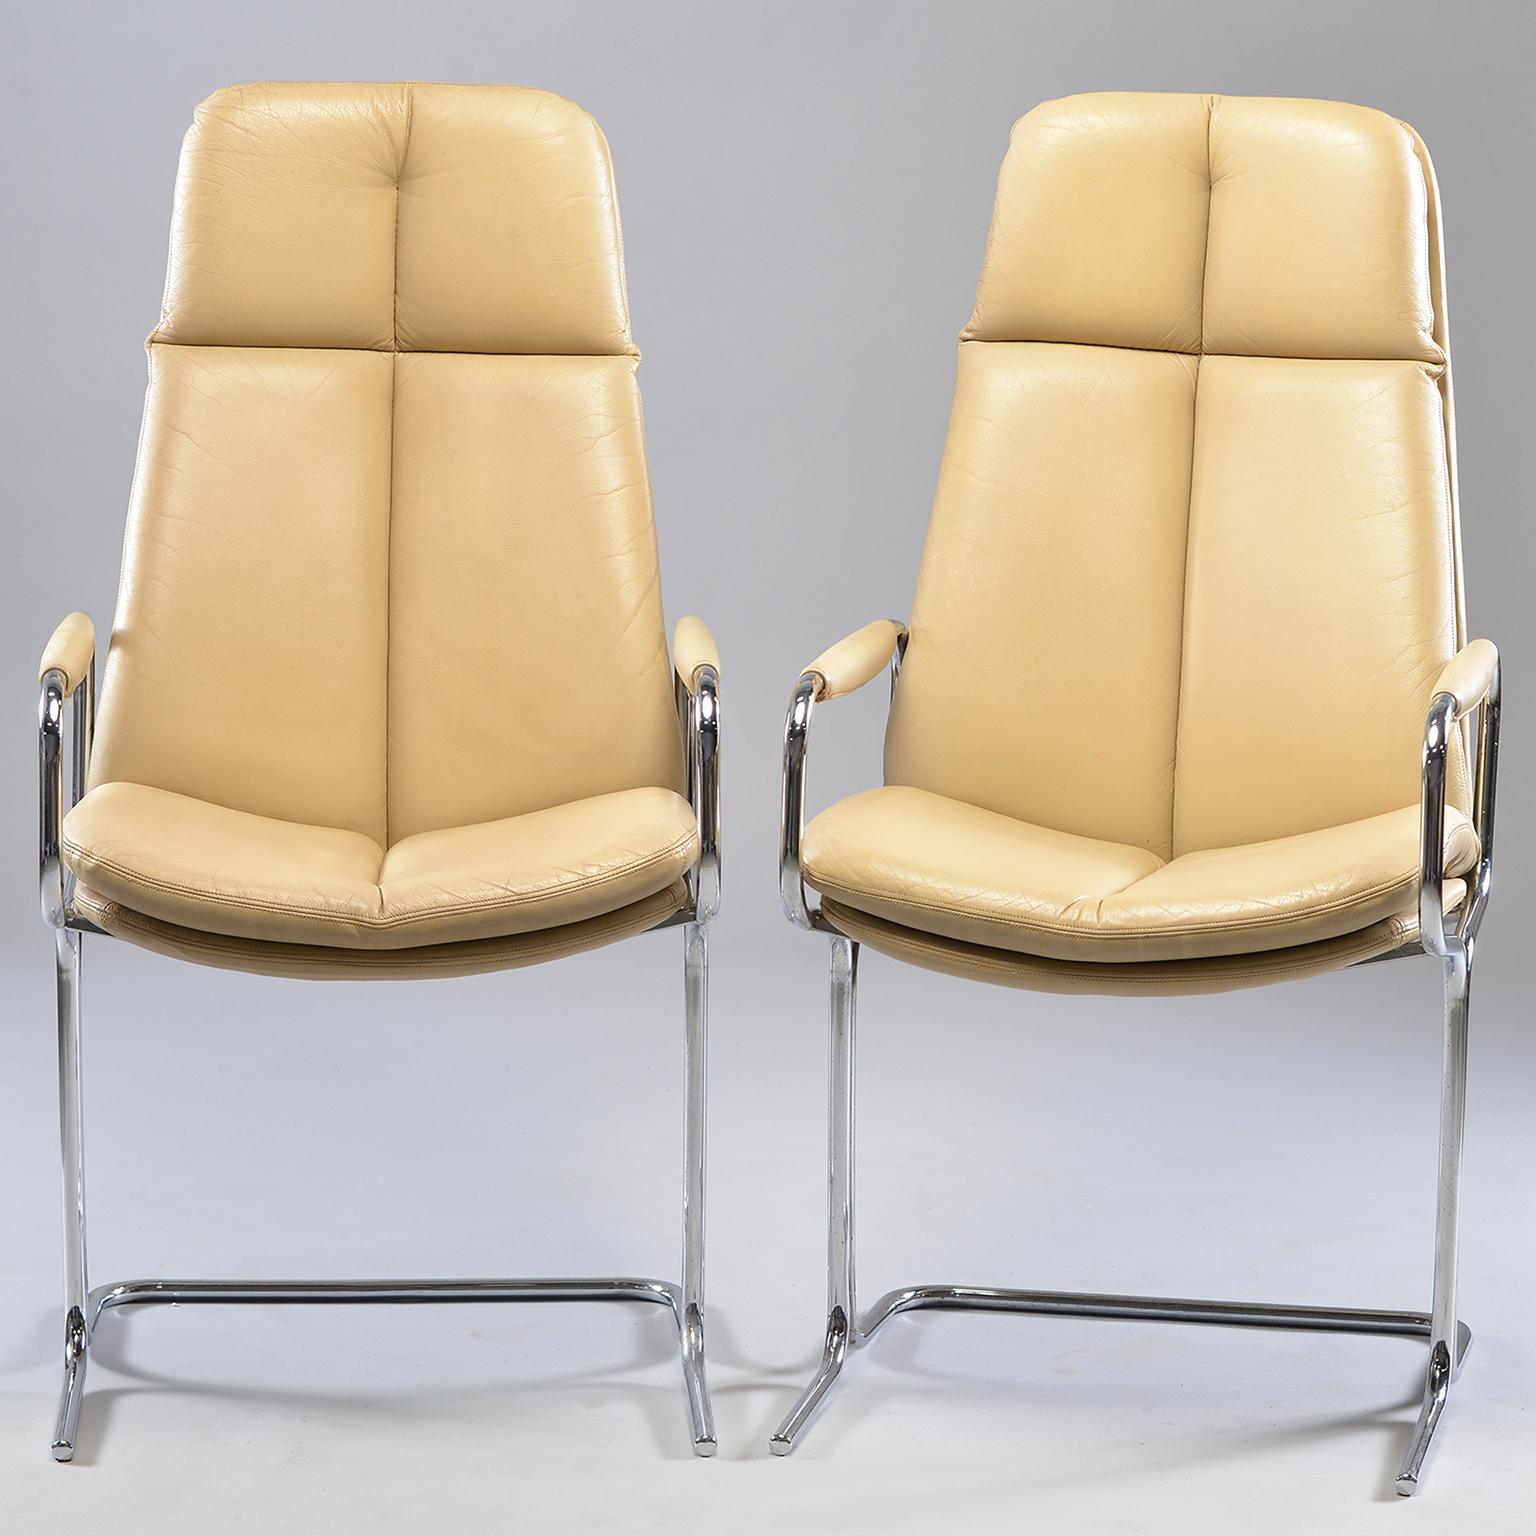 Pair of armchairs designed by Tim Bates for the Eleganza collection at Pieff, circa 1970s. Frames are made of tubular metal with chrome finish. Seats are ivory colored leather with high backs, slightly curved seats and padded armrests. Very good